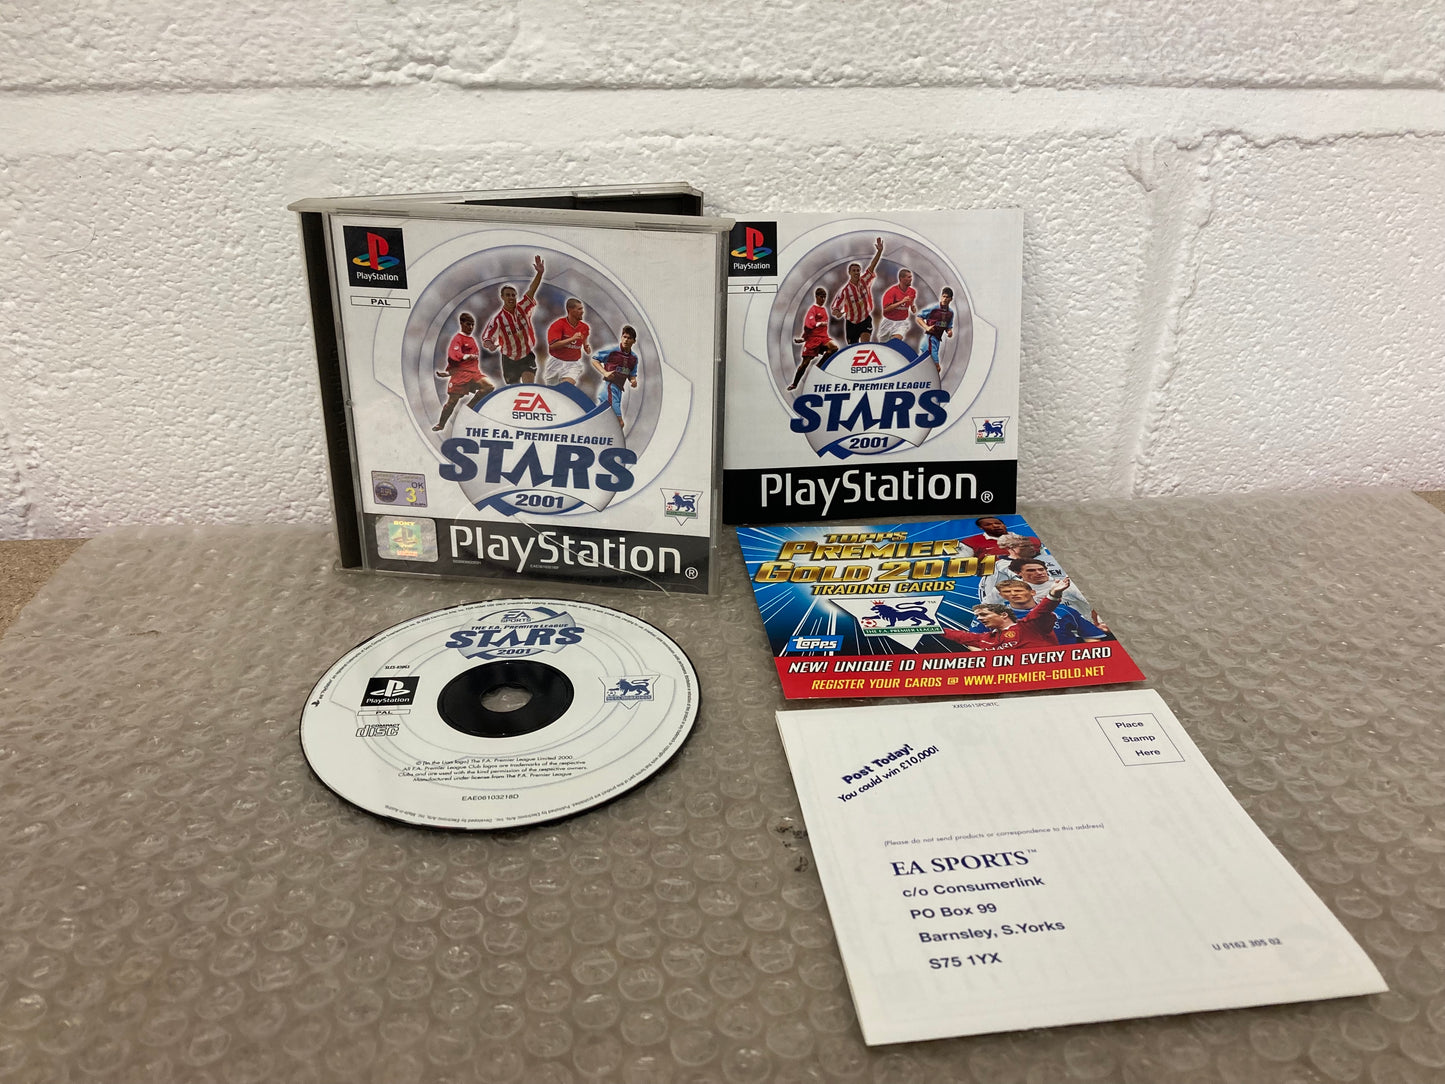 The F.A Premier League Stars 2001 Sony Playstation 1 (PS1) Game